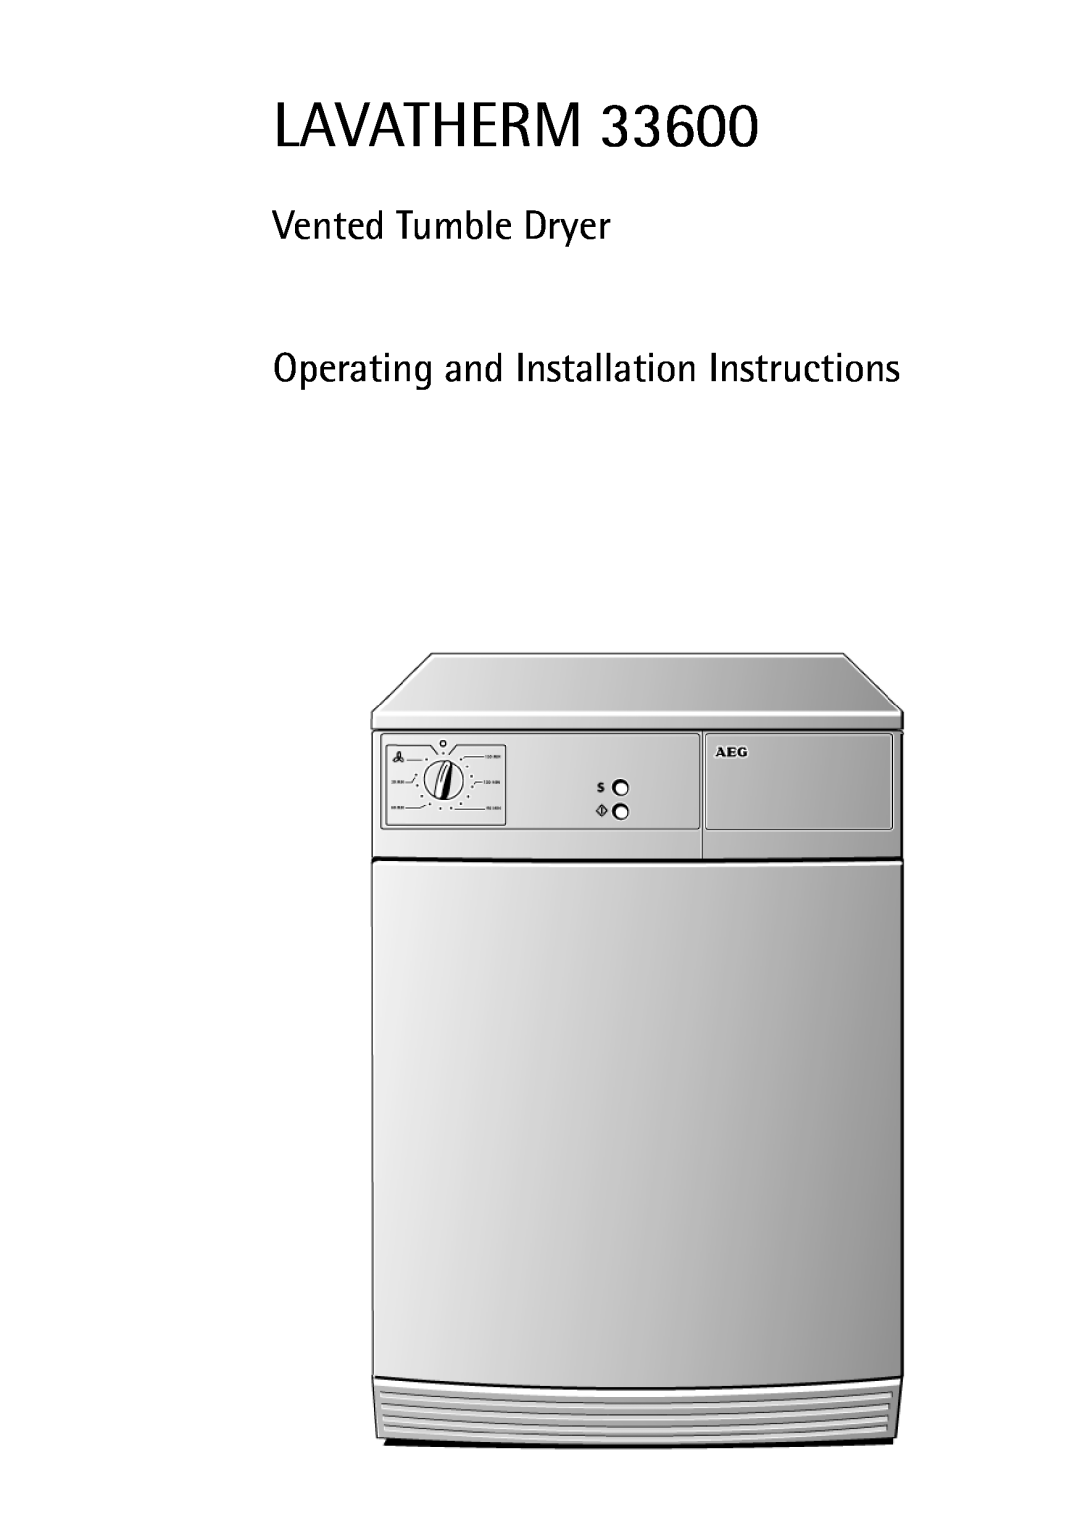 AEG 33600 installation instructions Lavatherm, Vented Tumble Dryer Operating and Installation Instructions 